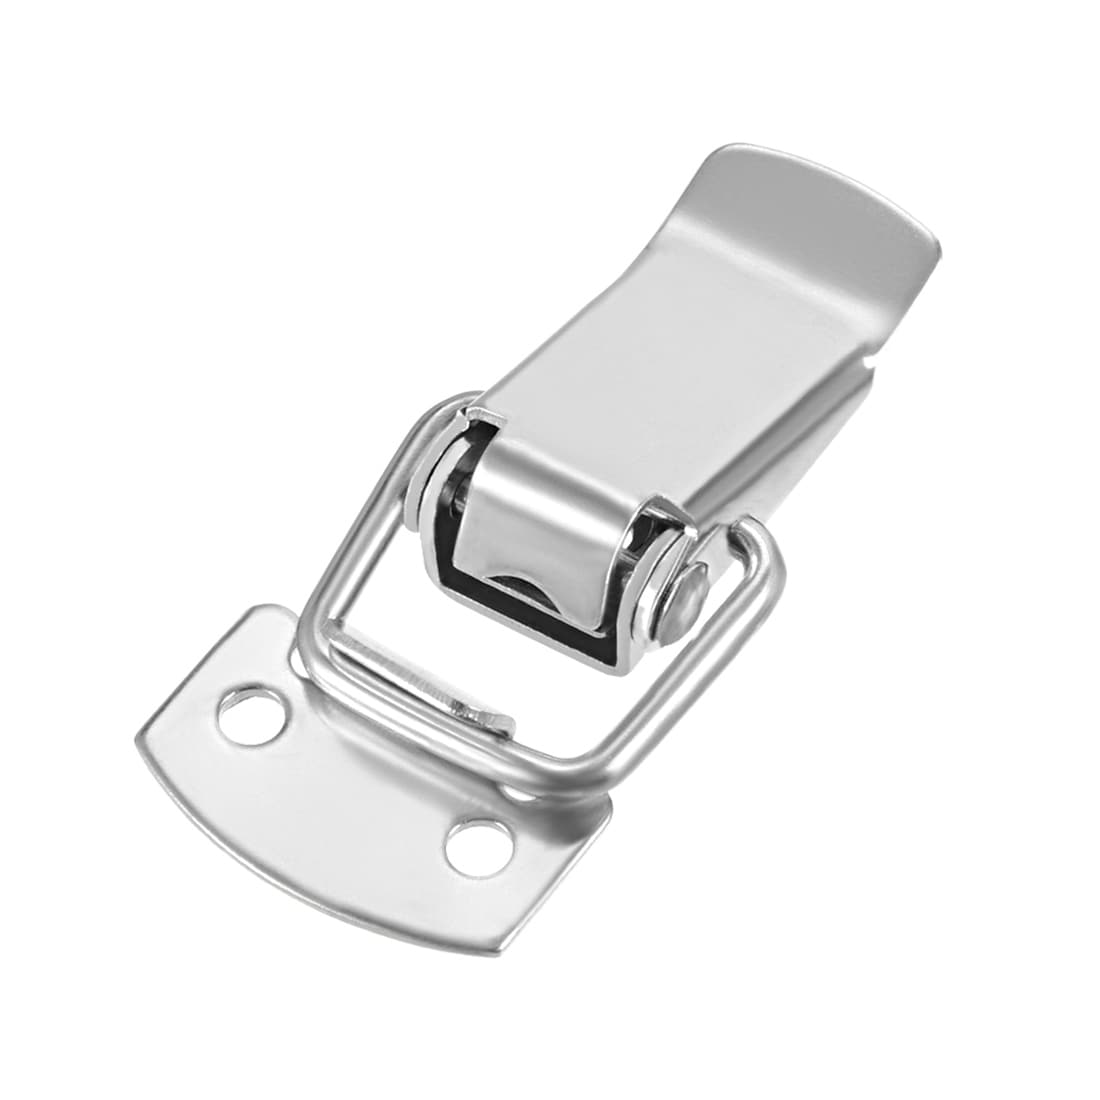 201 Stainless Steel Spring Loaded Toggle Latch Catch Clamp Hasps